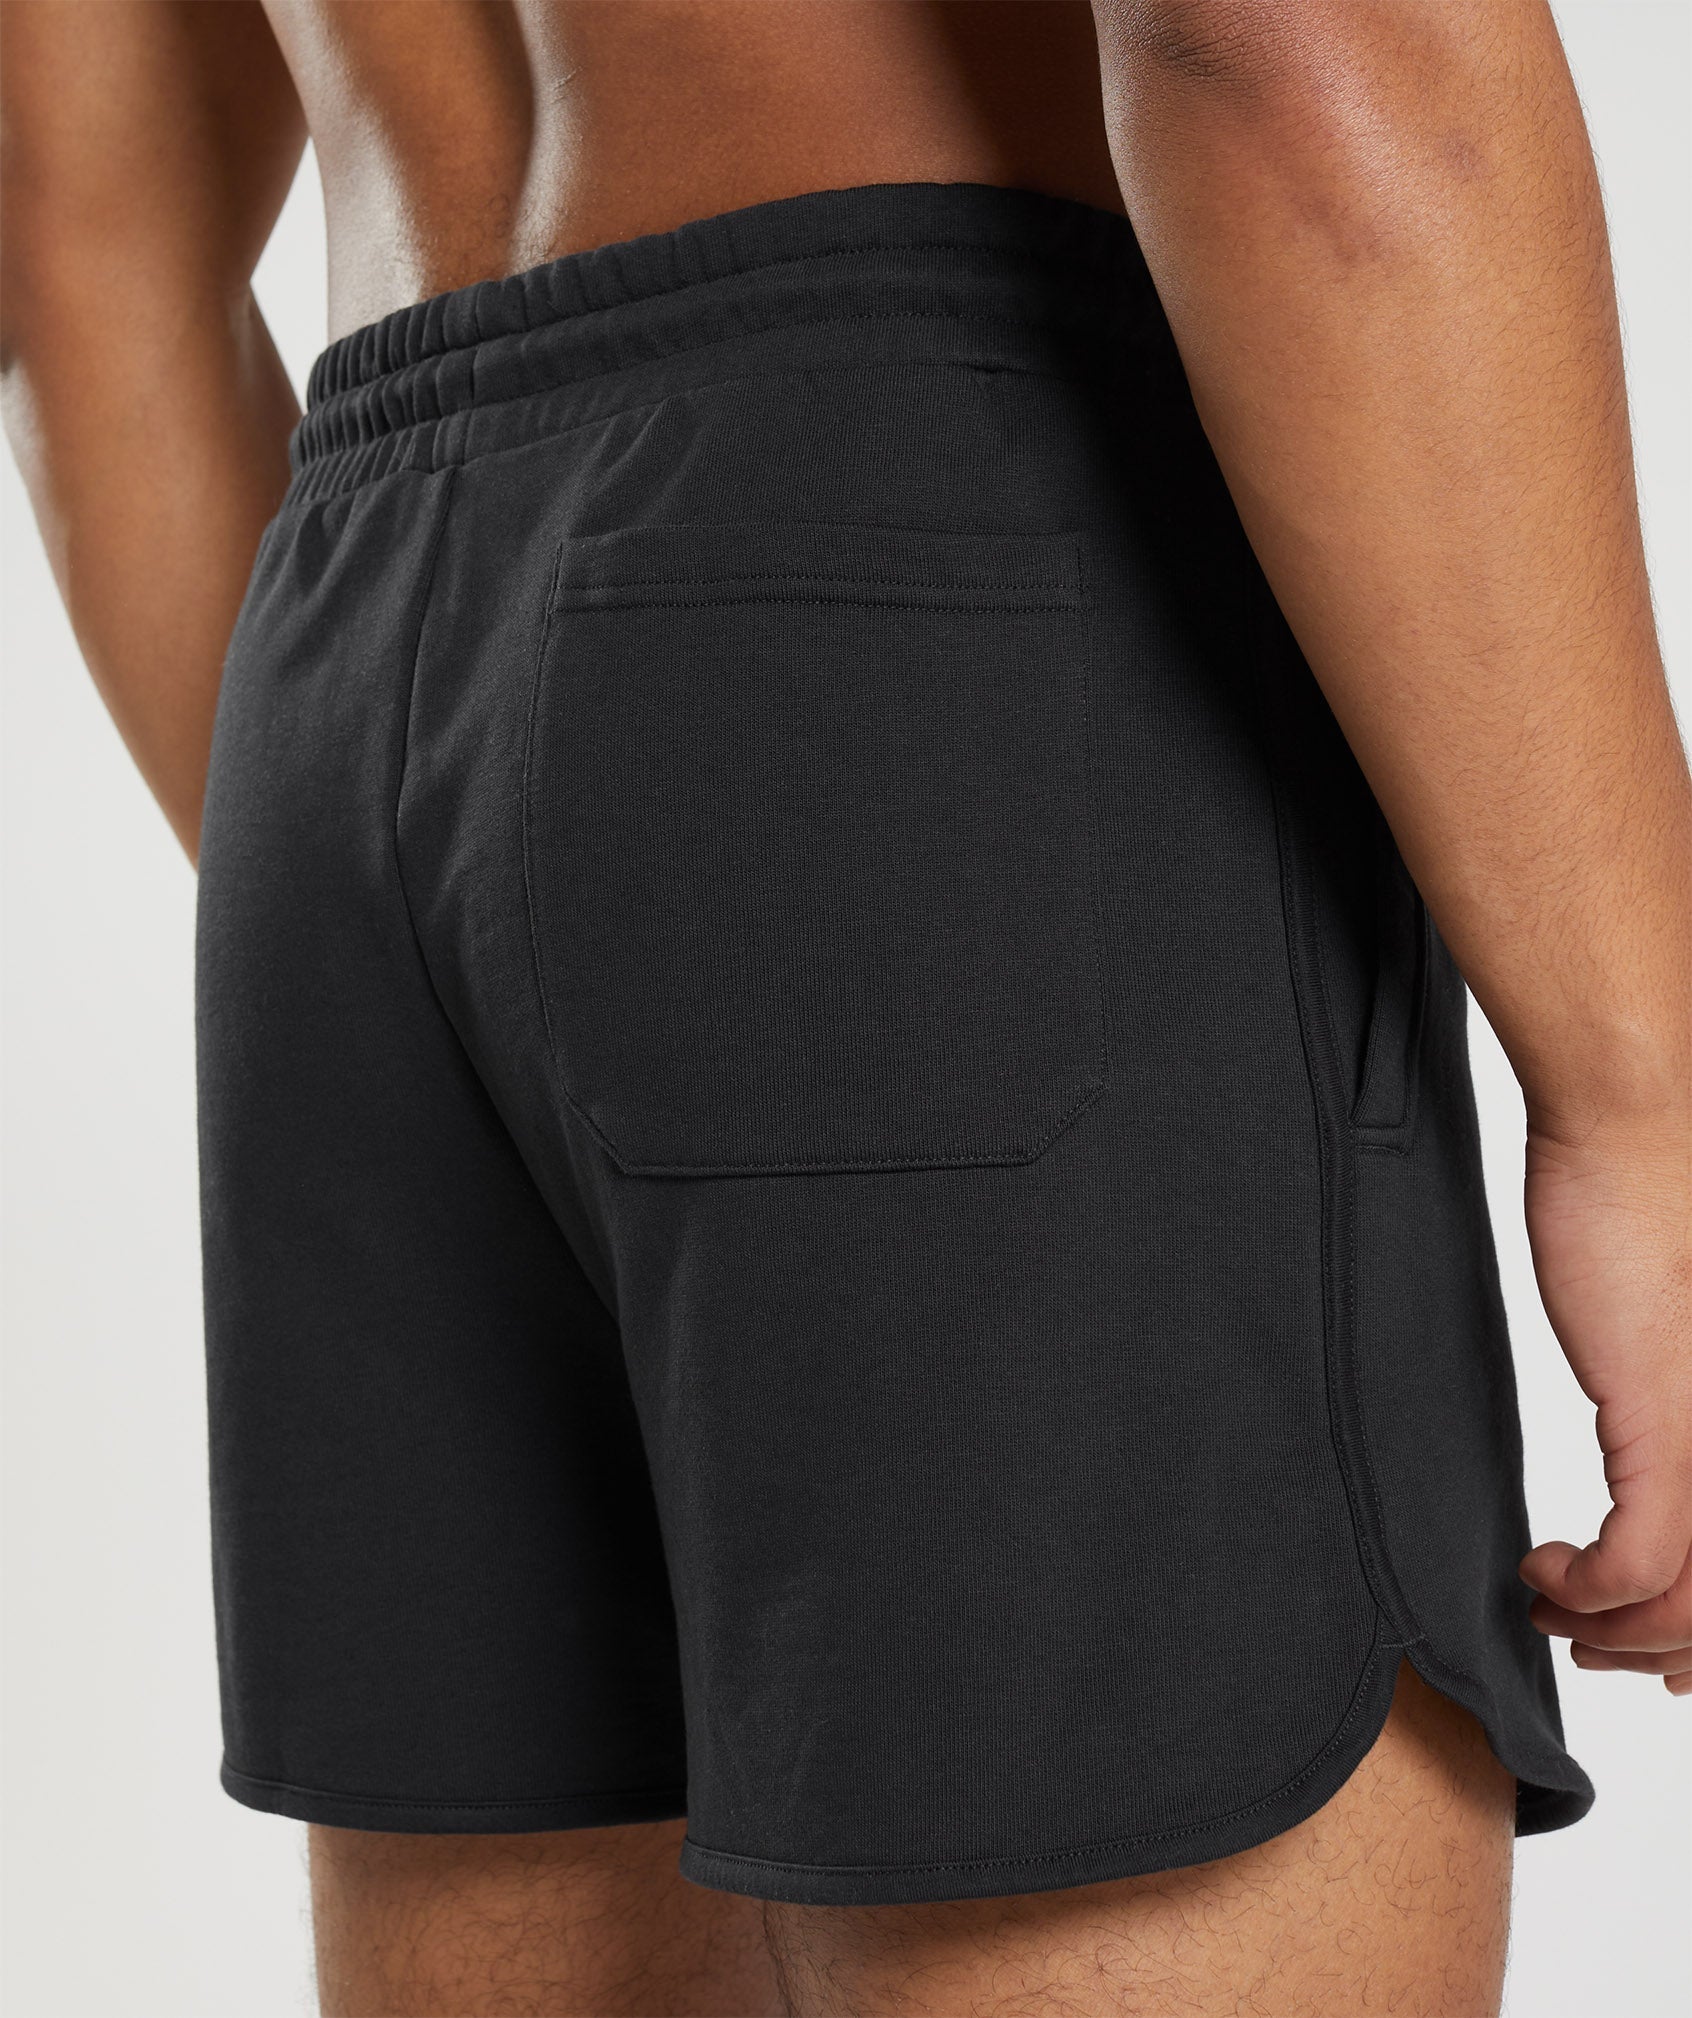 Rest Day Sweats 4'' Lounge Shorts in Black - view 8